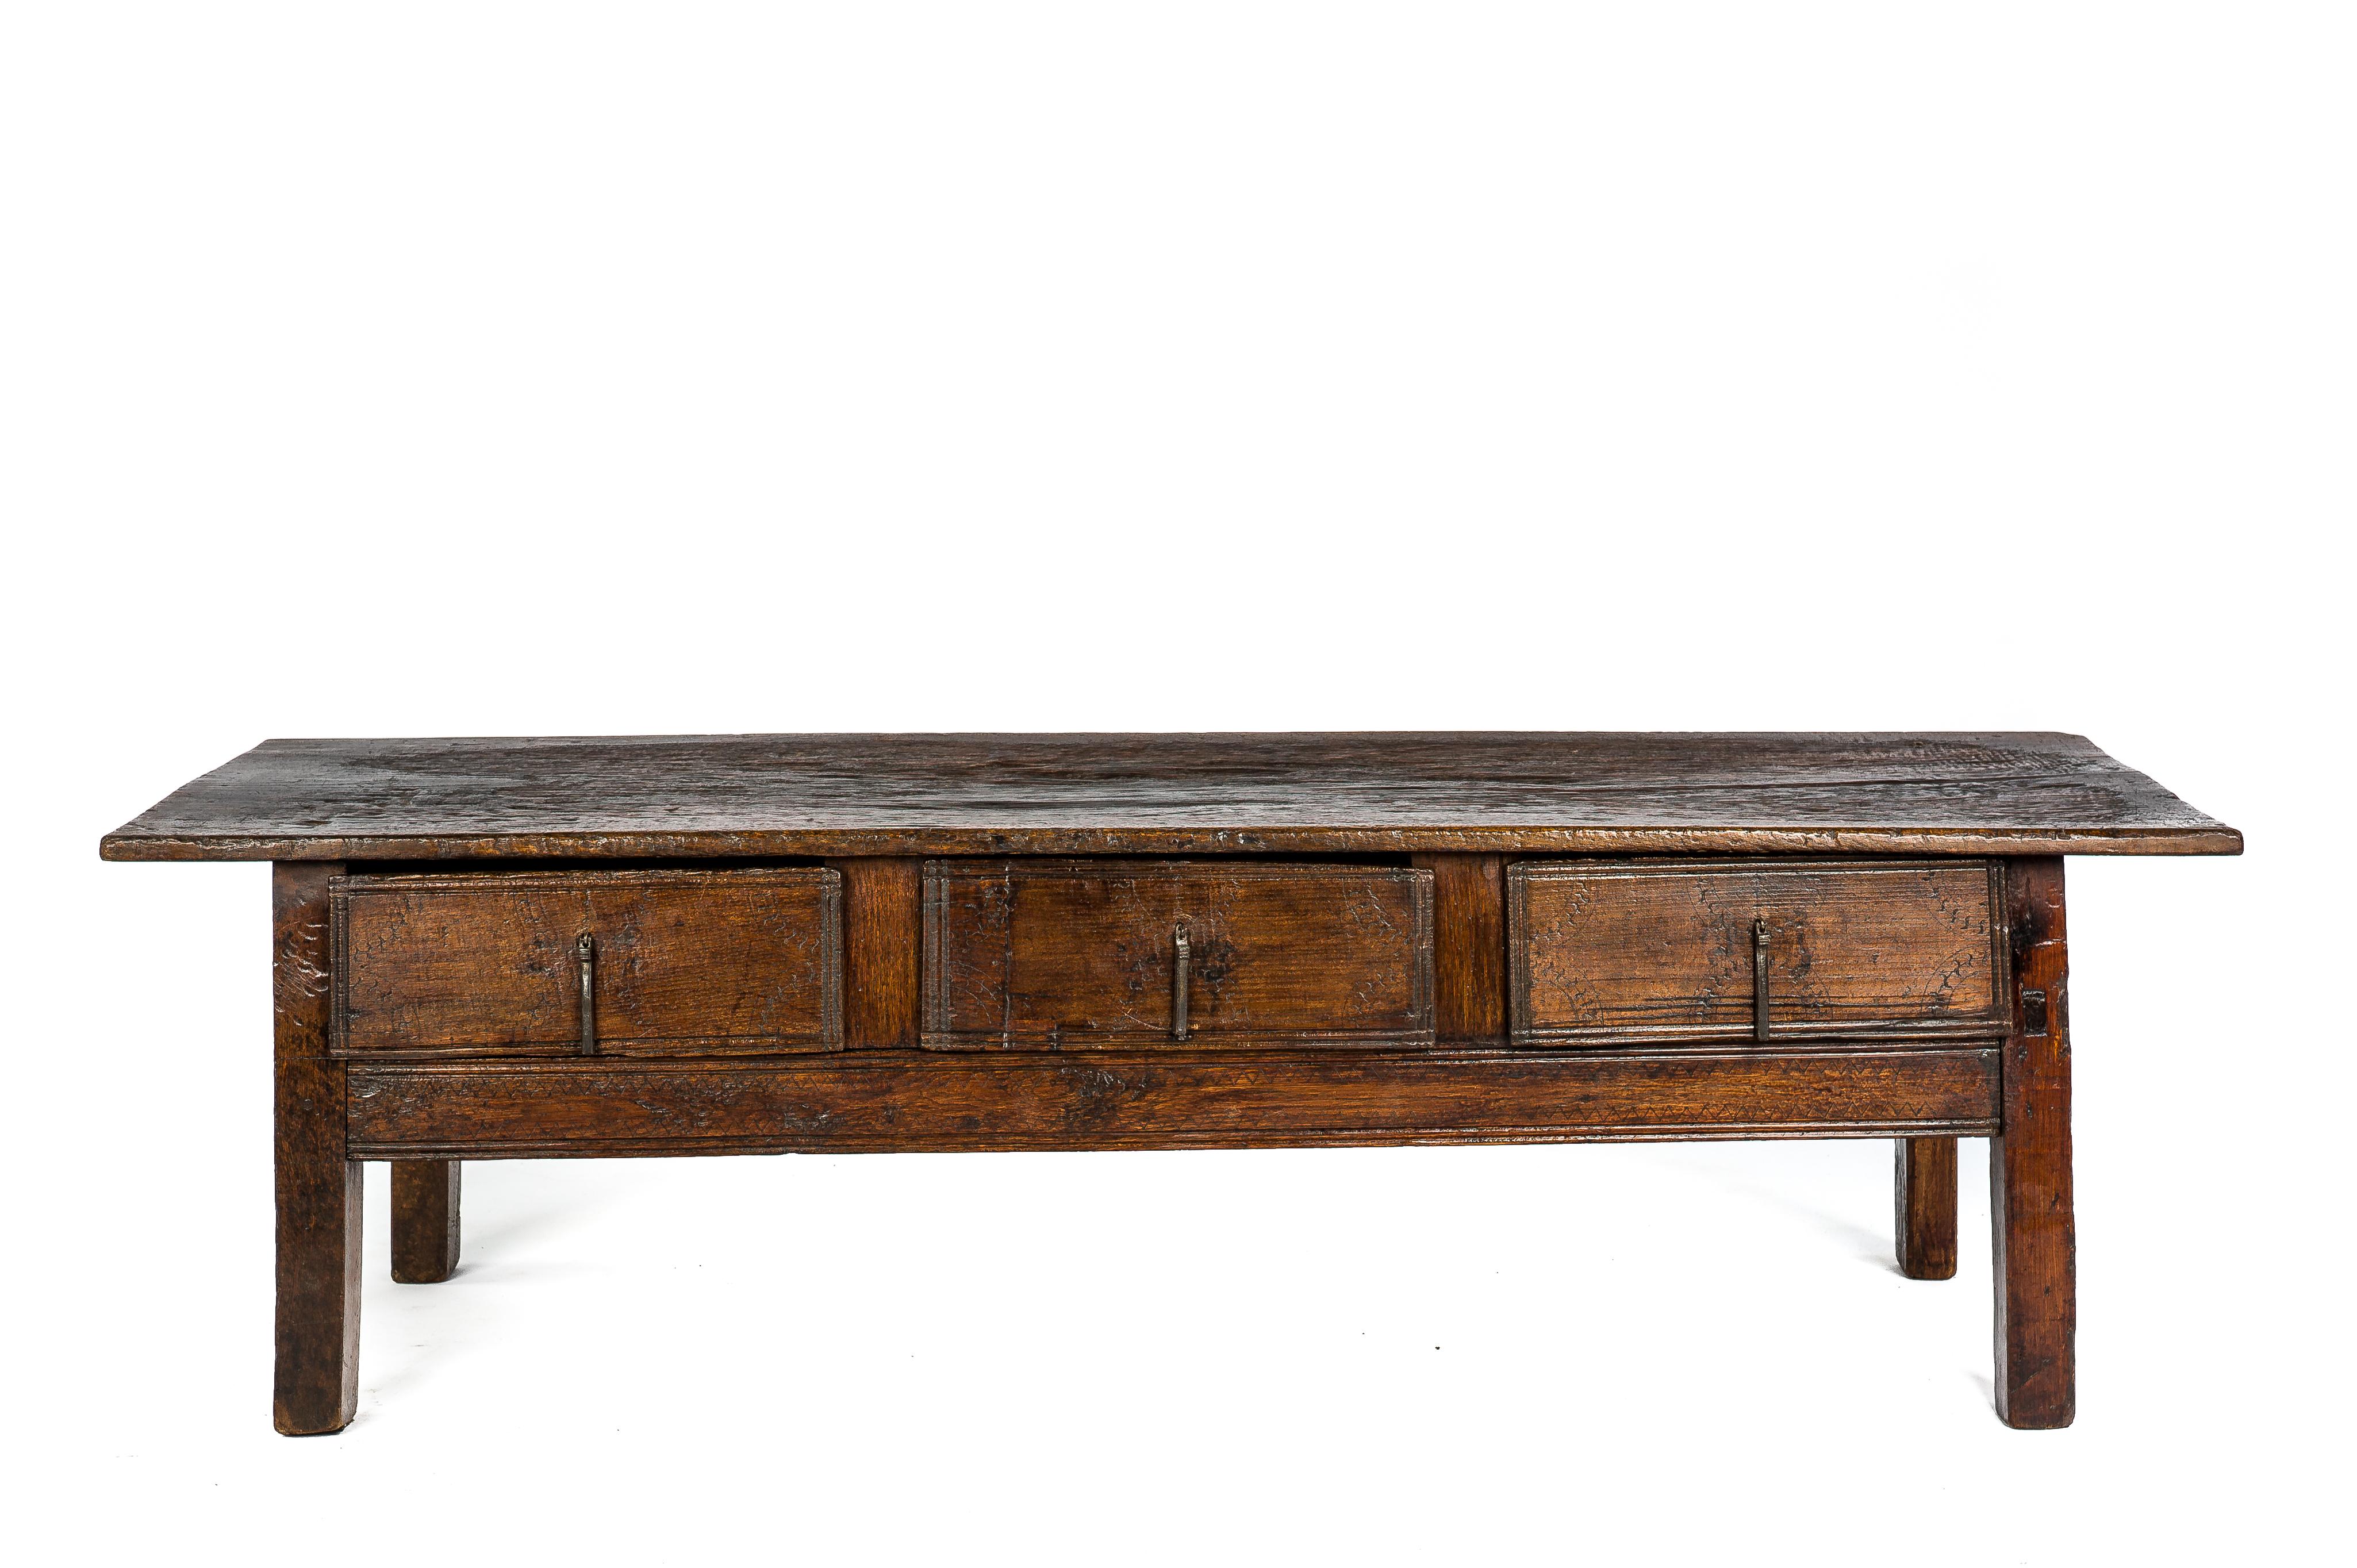 This beautiful warm brown color rustic coffee table or low table originates in rural Spain and dates circa 1725. The table has a fantastic worn top that was made from a single board of solid chestnut wood 1 inch thick. The top is very distressed and